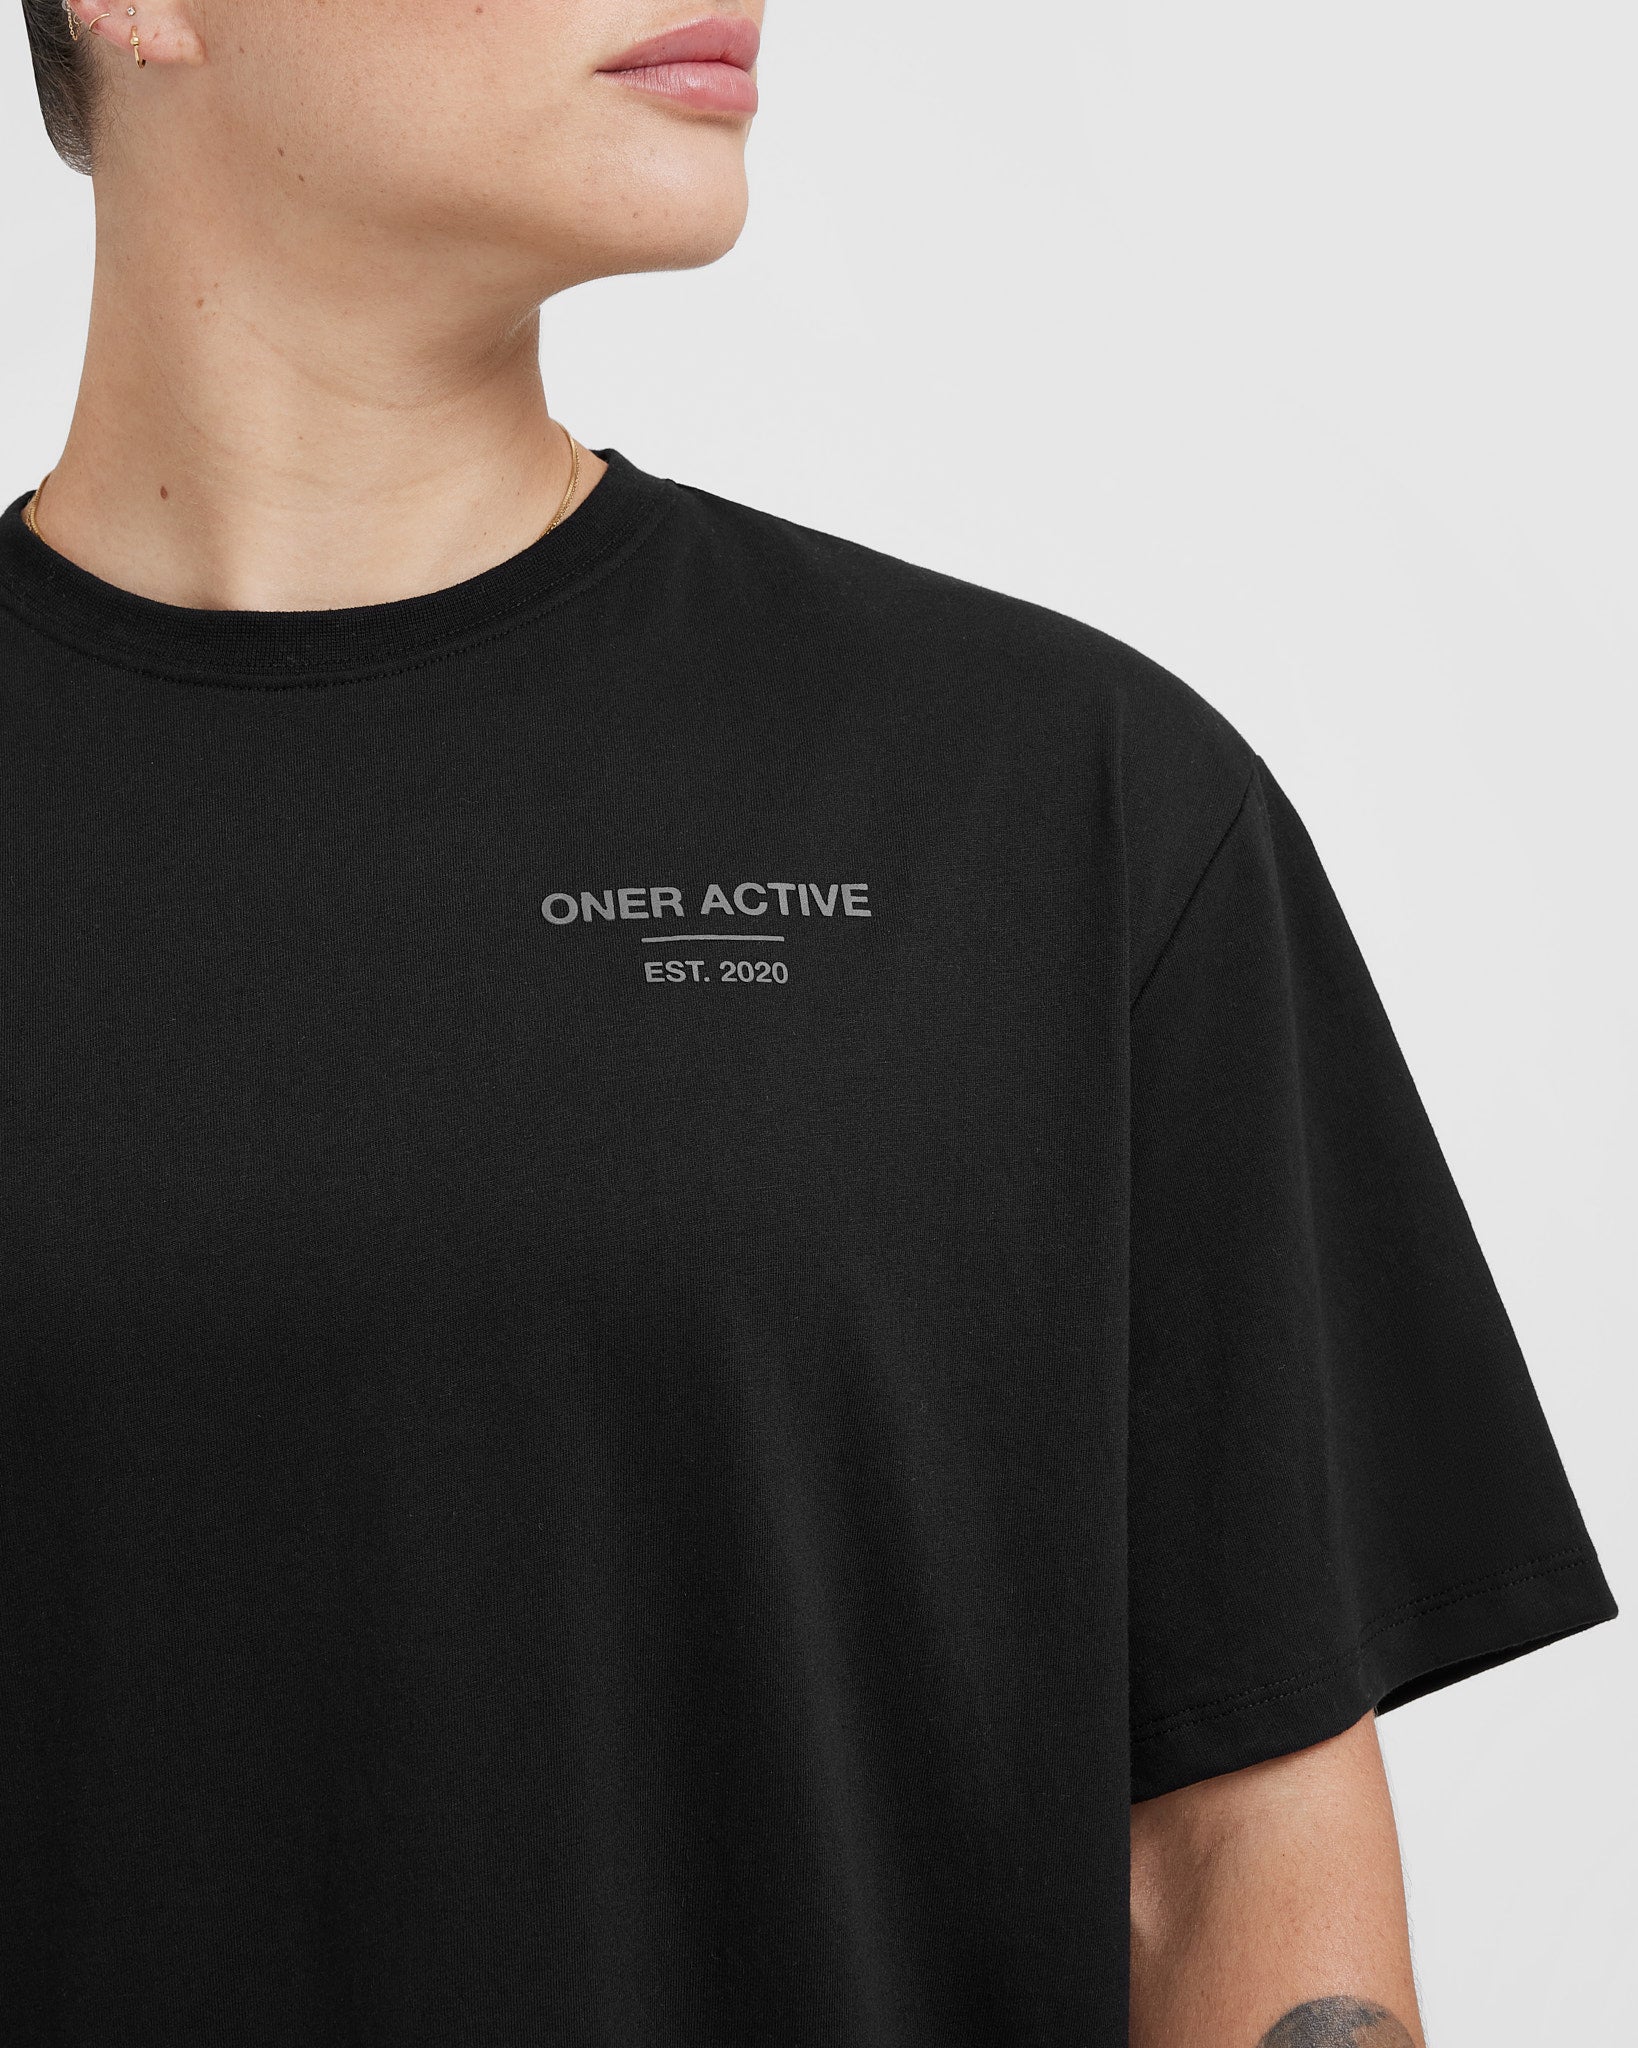 Black Oversized T-Shirt Women's - Classic Lifters | Oner Active US